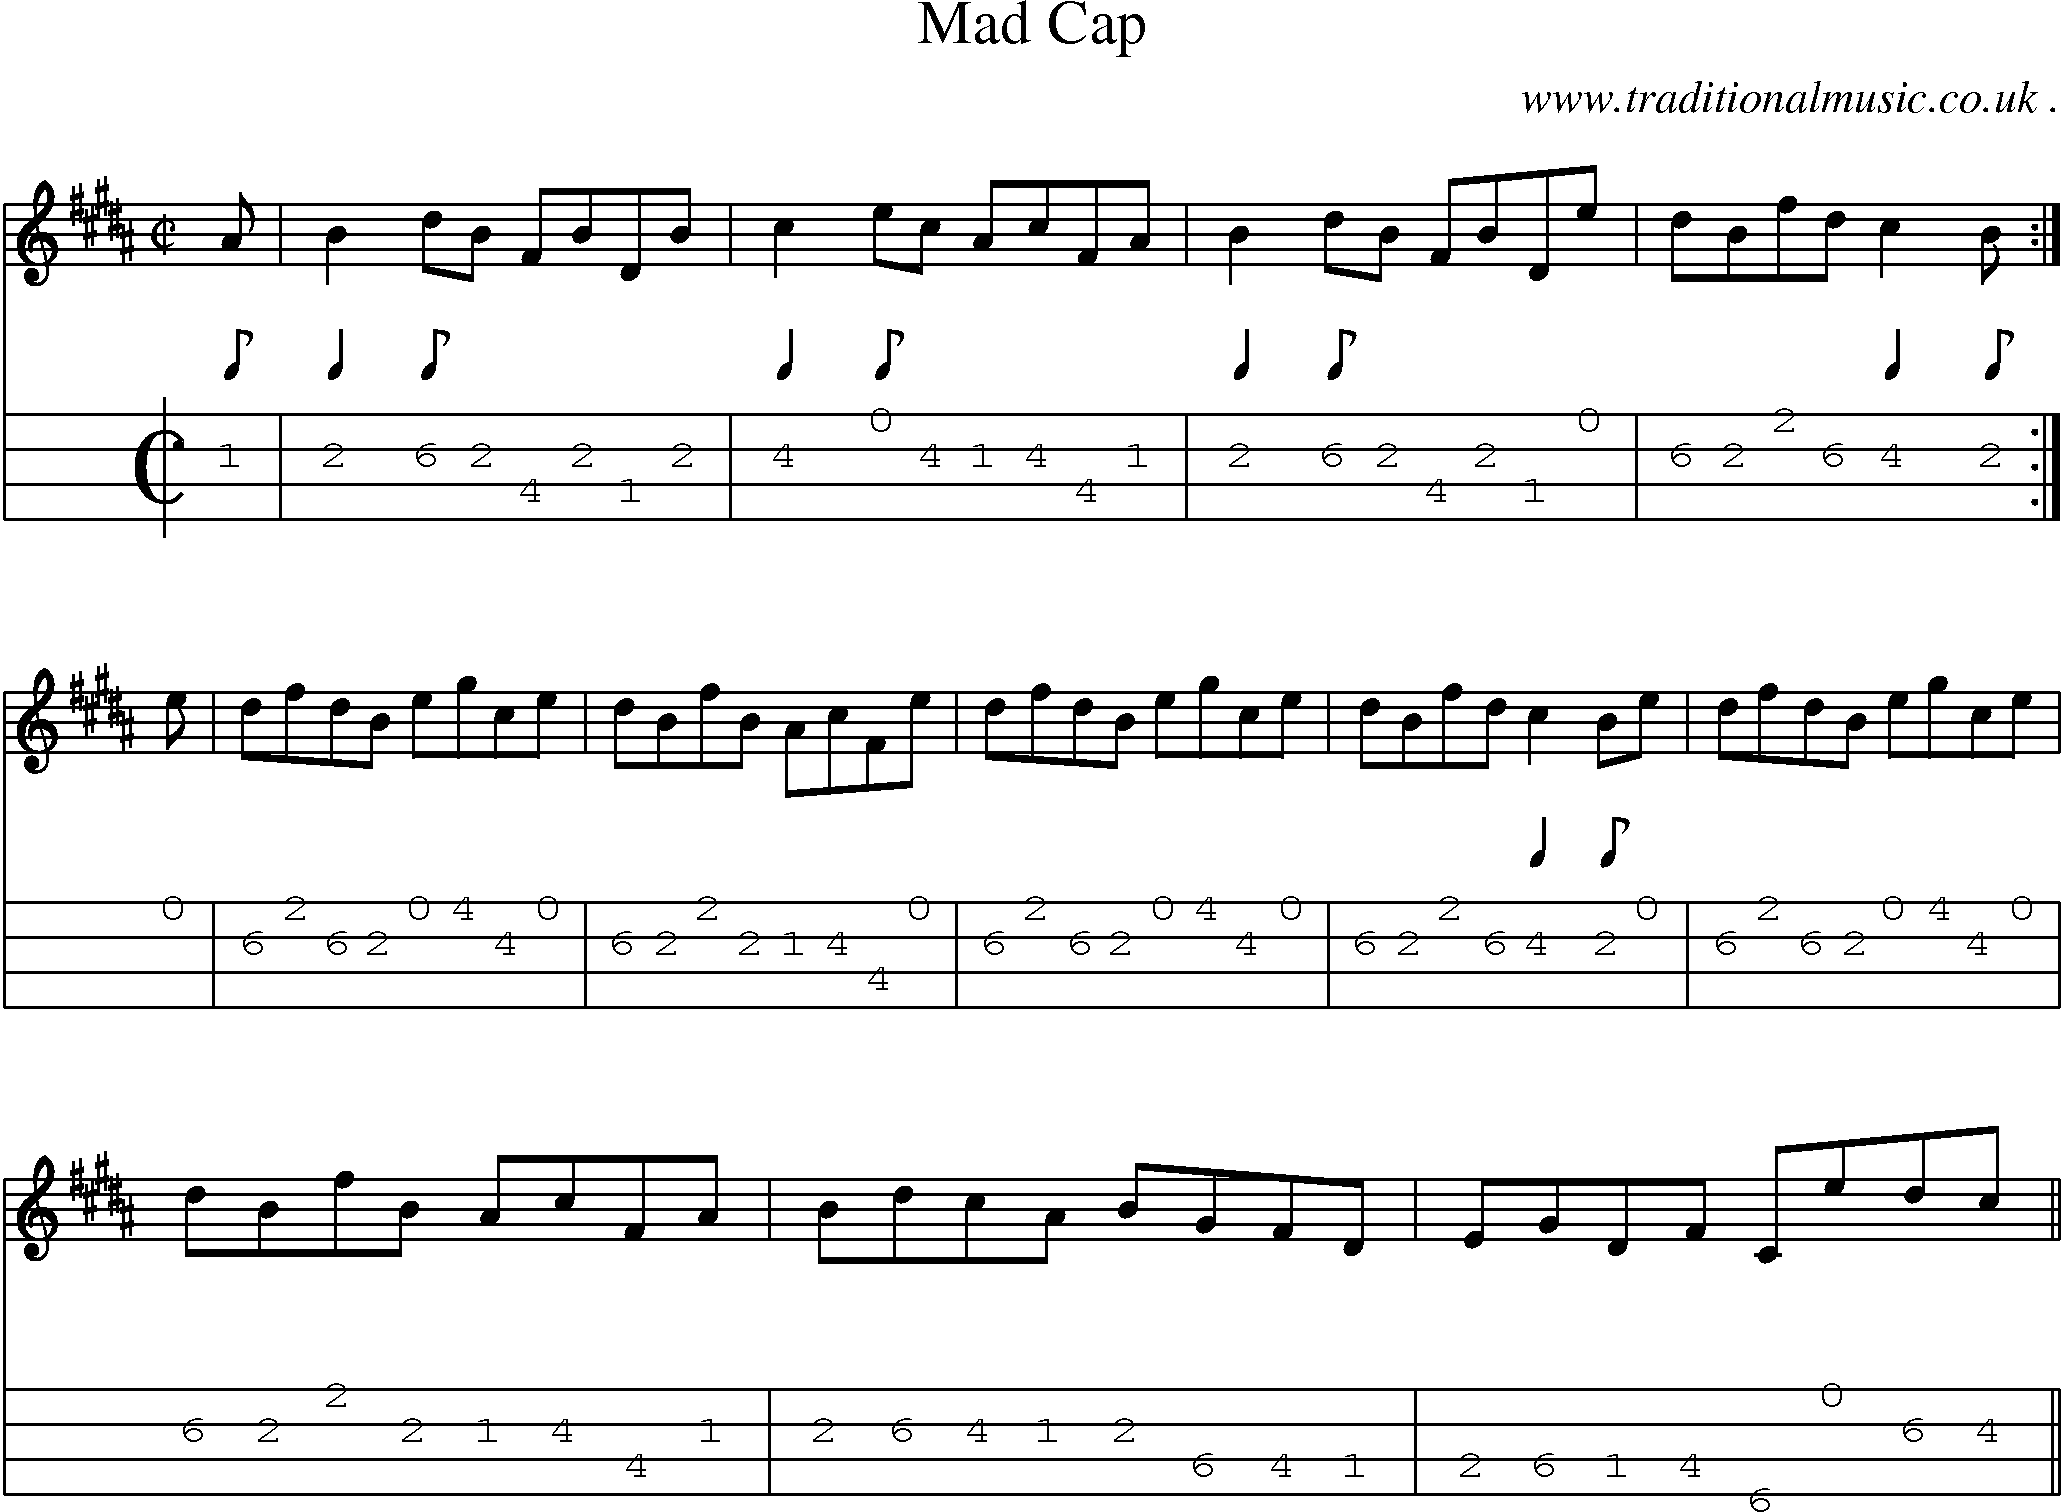 Sheet-music  score, Chords and Mandolin Tabs for Mad Cap